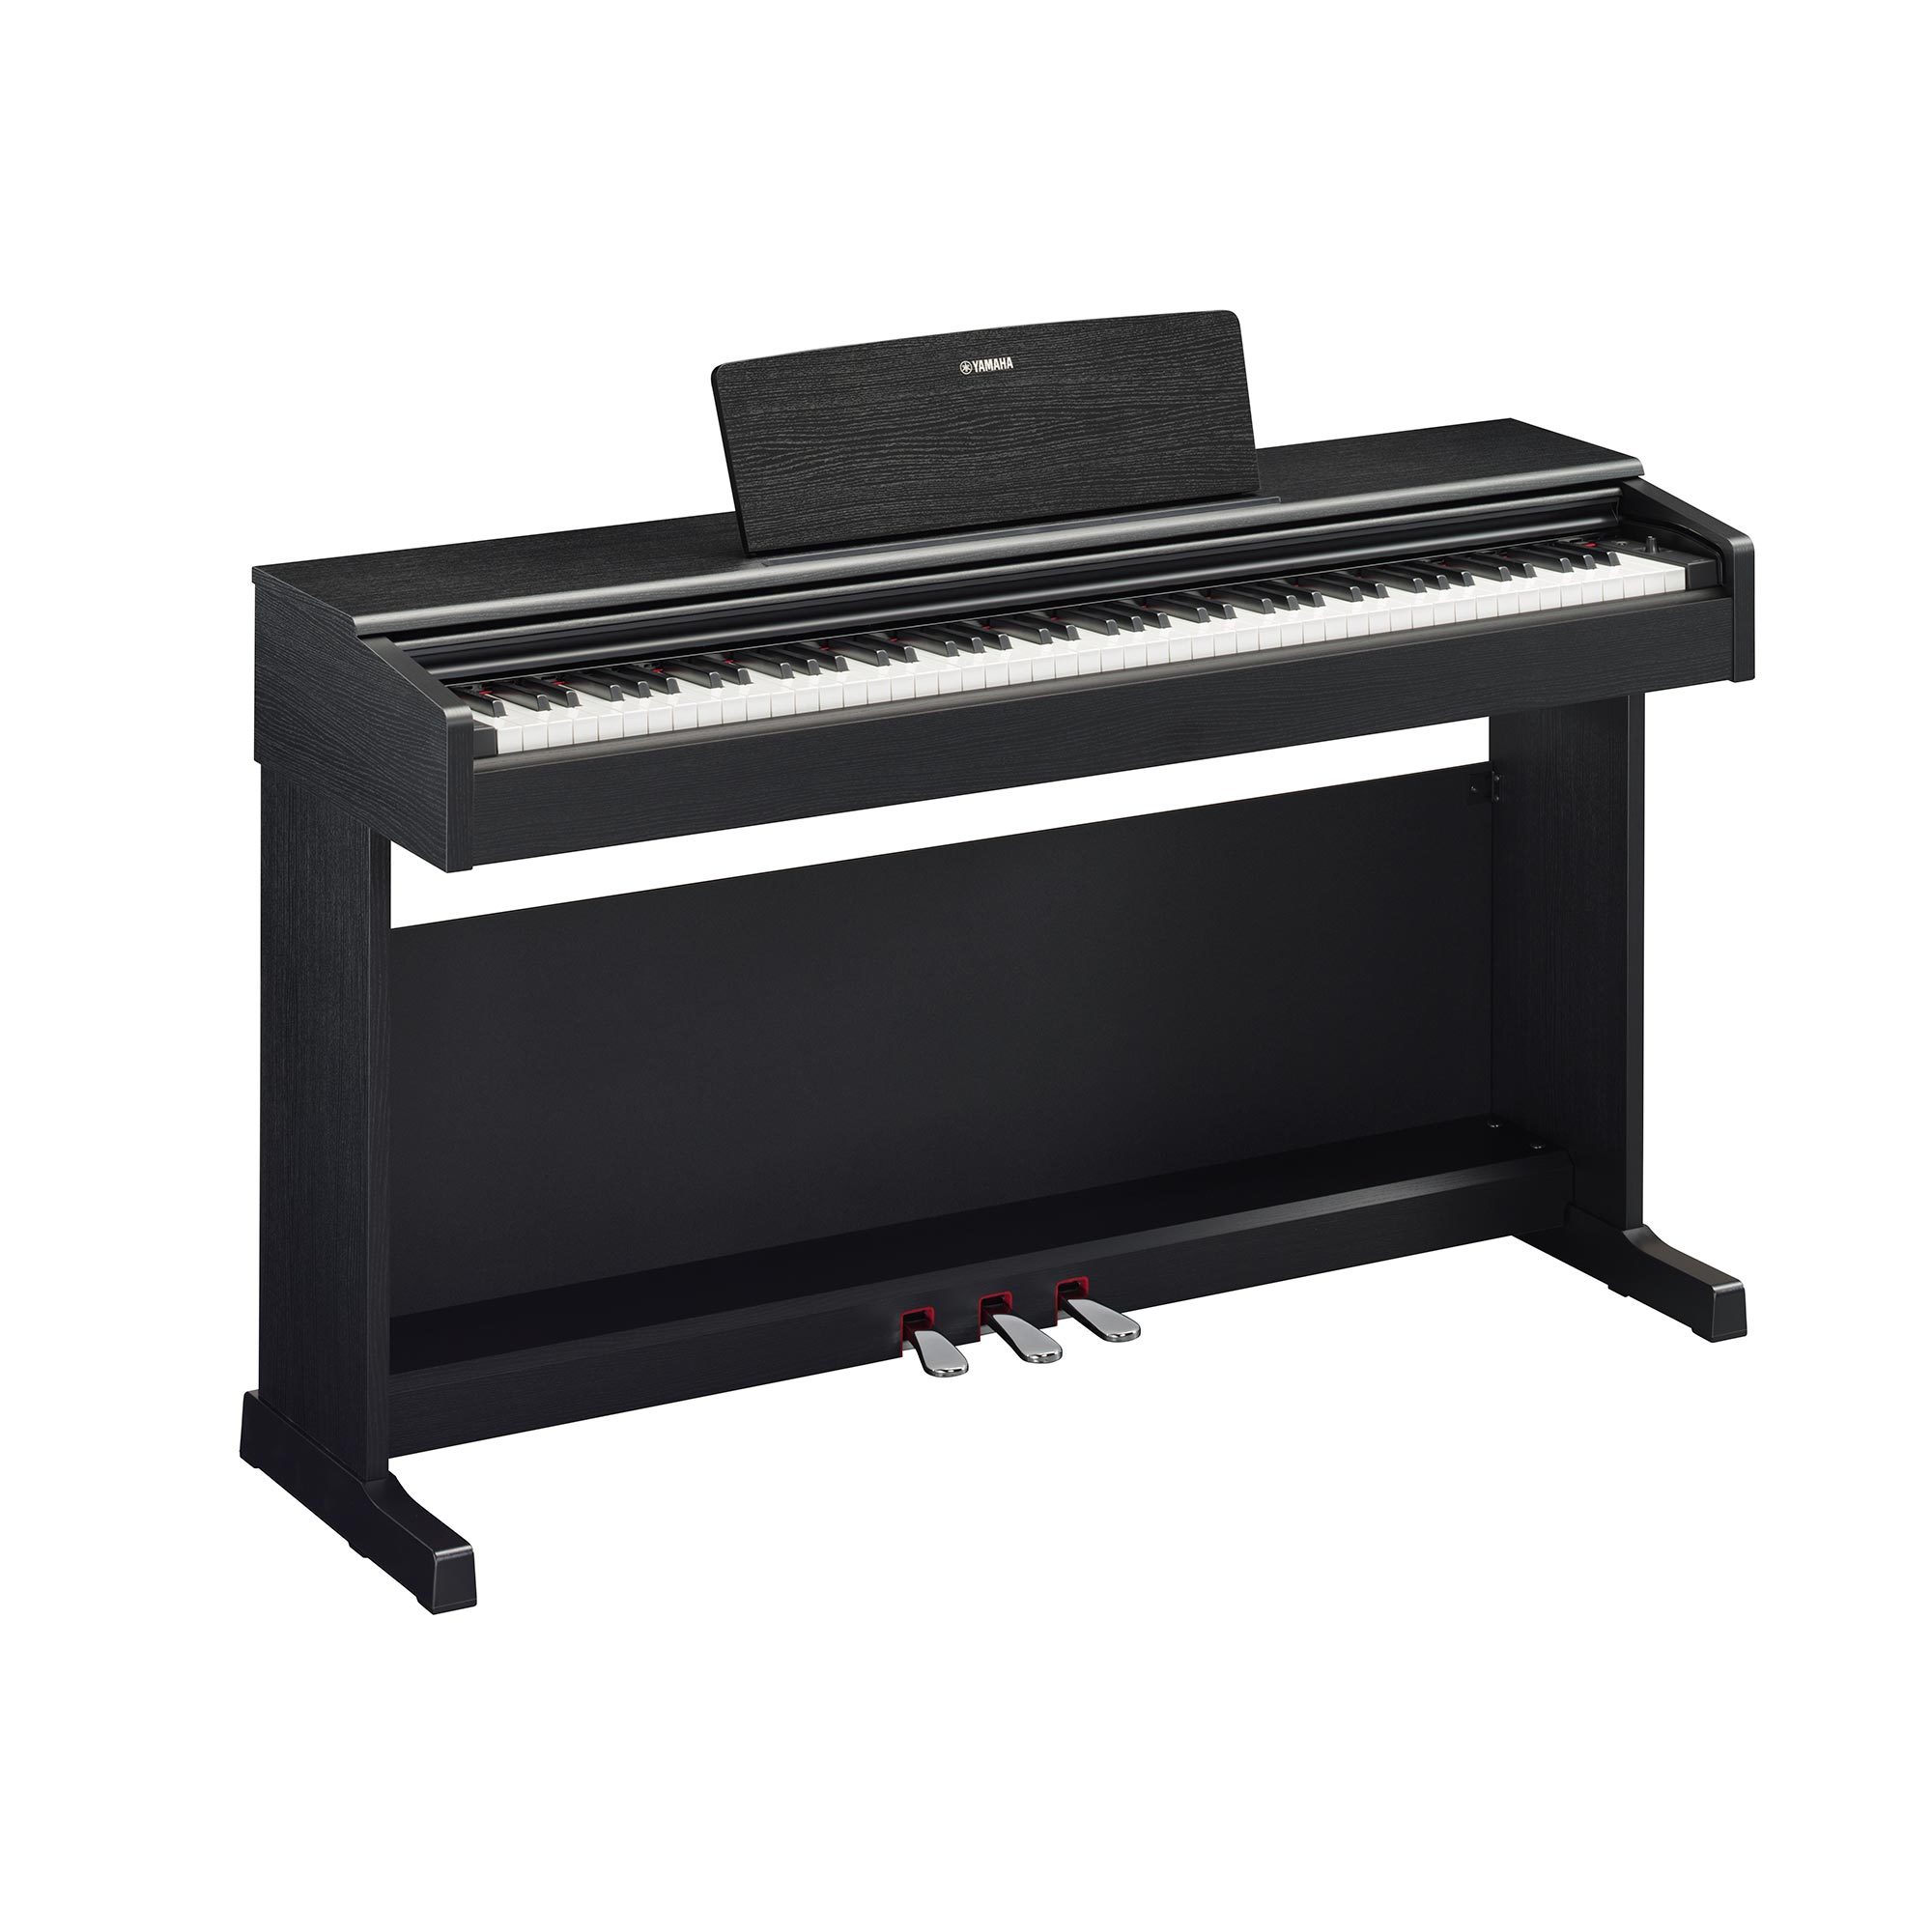 YDP-145 - Overview - ARIUS - Pianos - Musical Instruments 